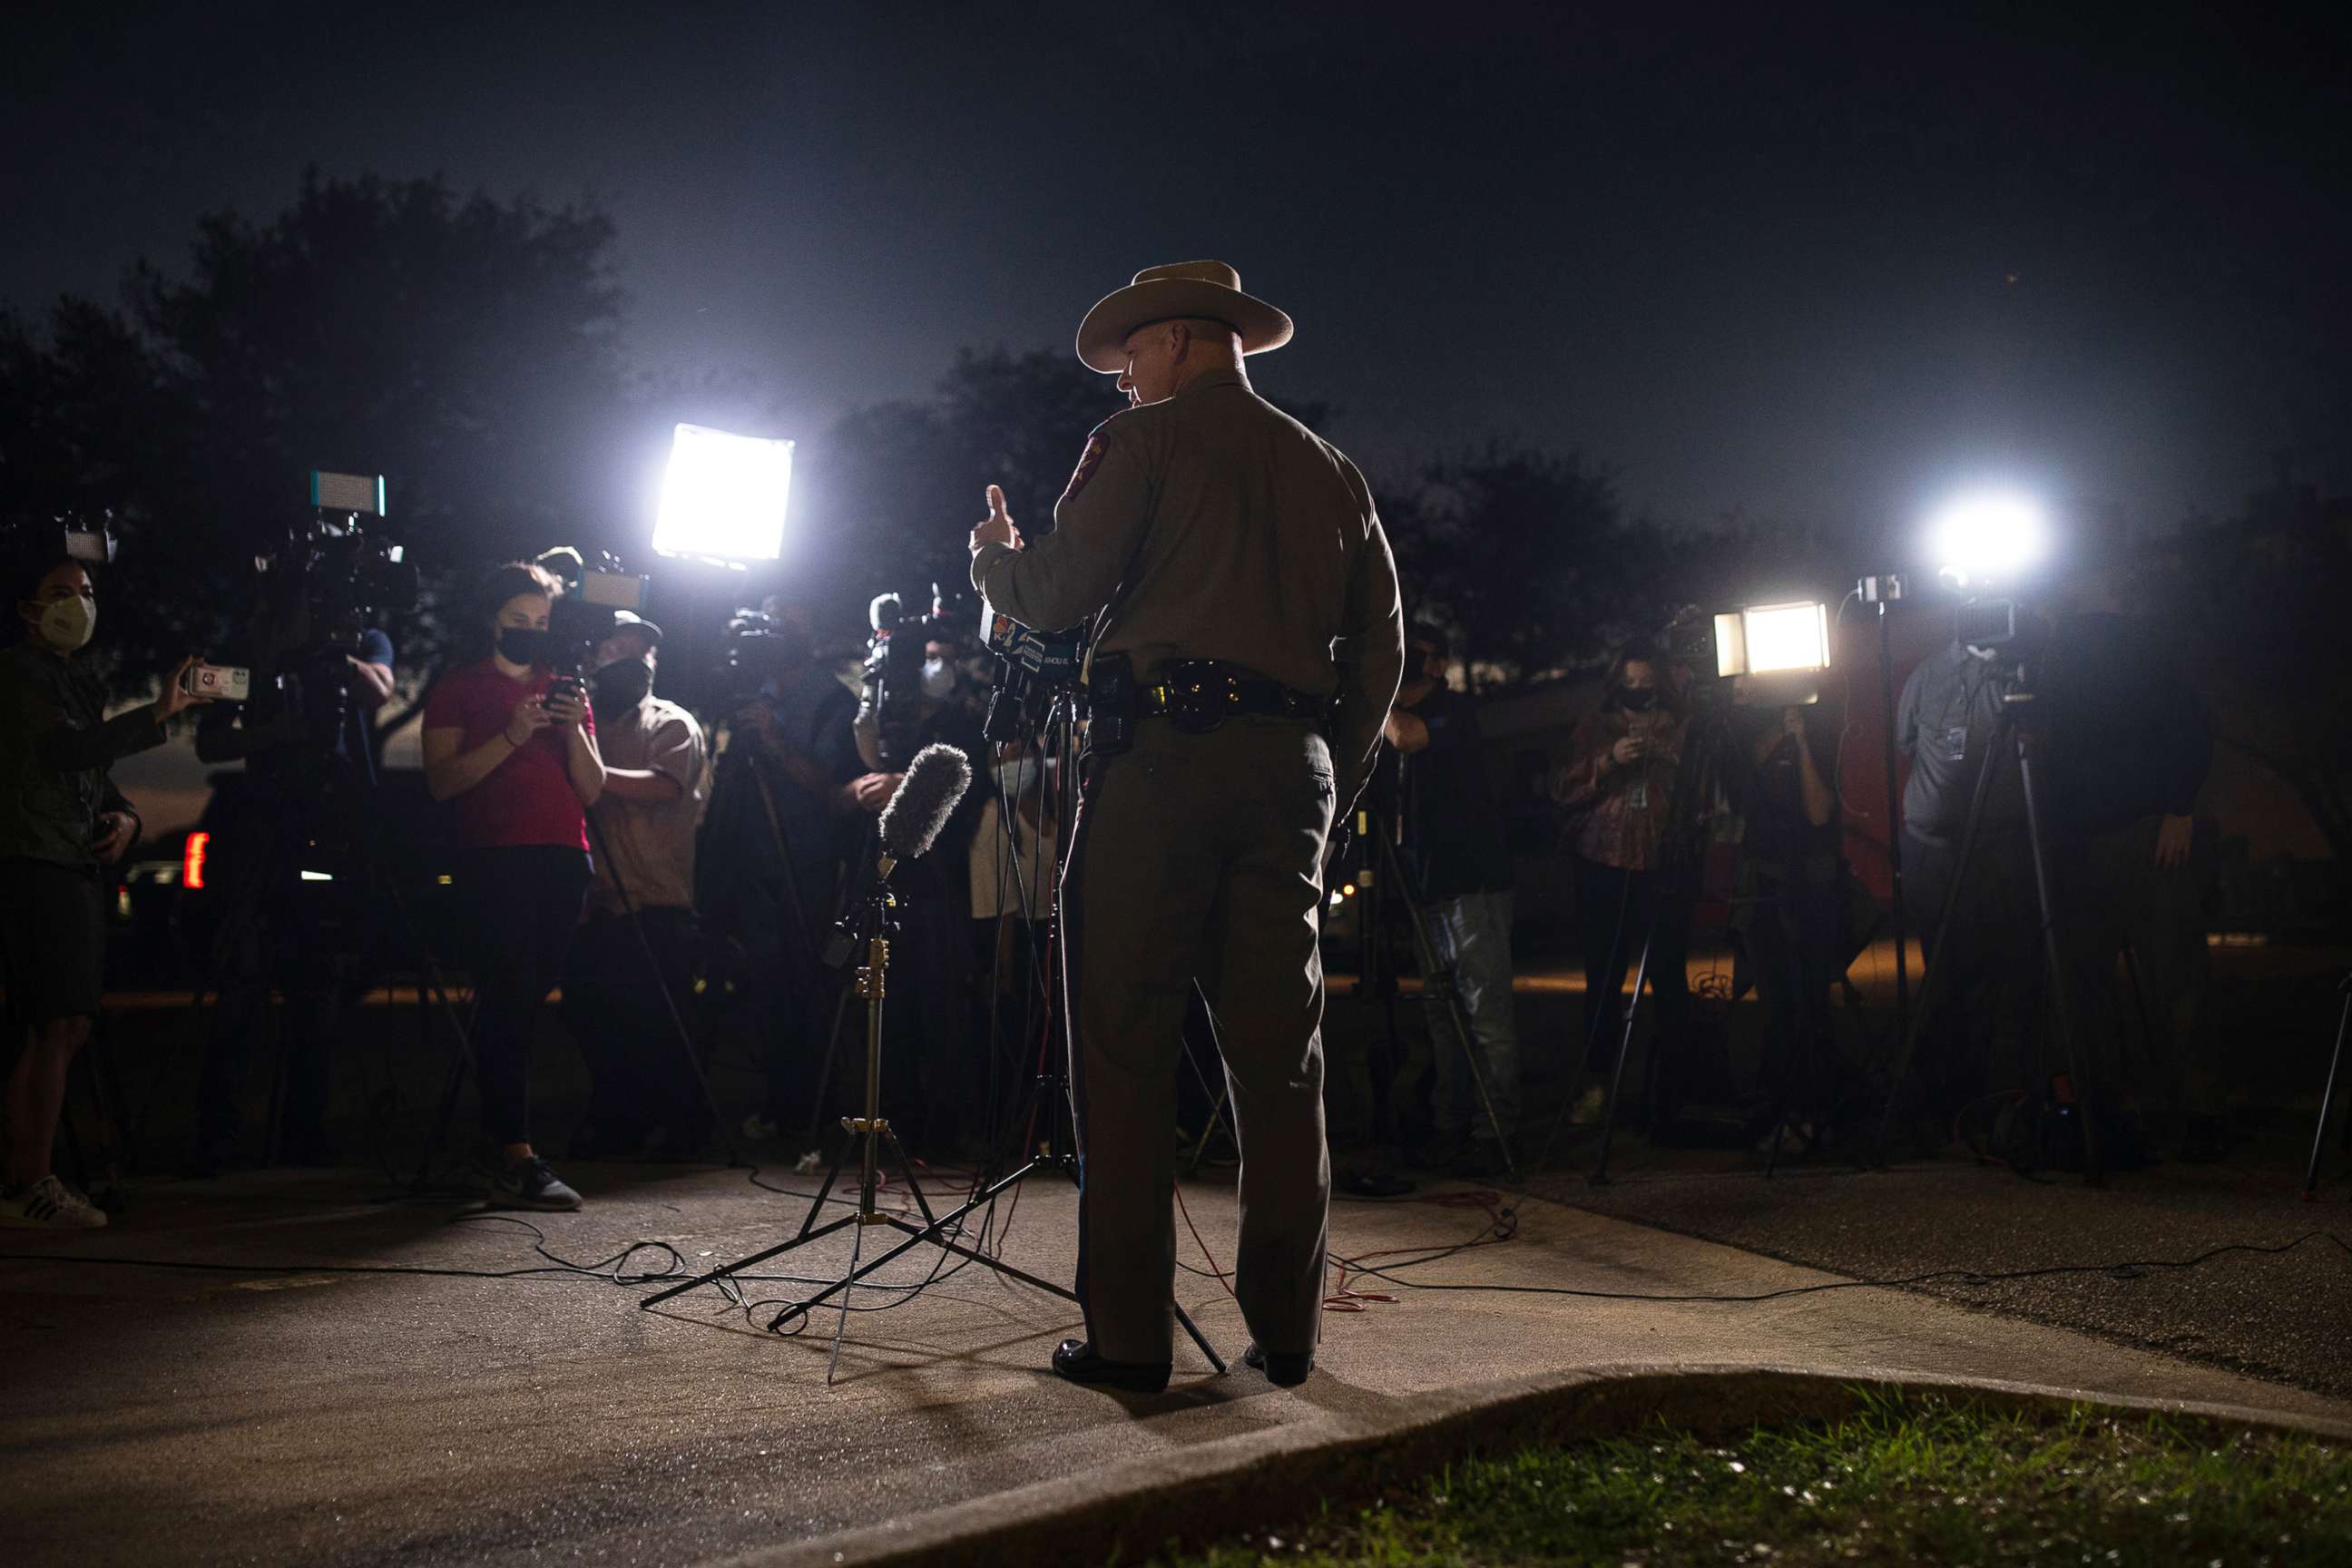 PHOTO: Texas Department of Public Safety spokesperson Lt. Craig Cummings speaks to members of the media outside of the hospital where people wounded during a shooting at Kent Moore Cabinets are being treated, April 8, 2021 in Bryan, Texas.